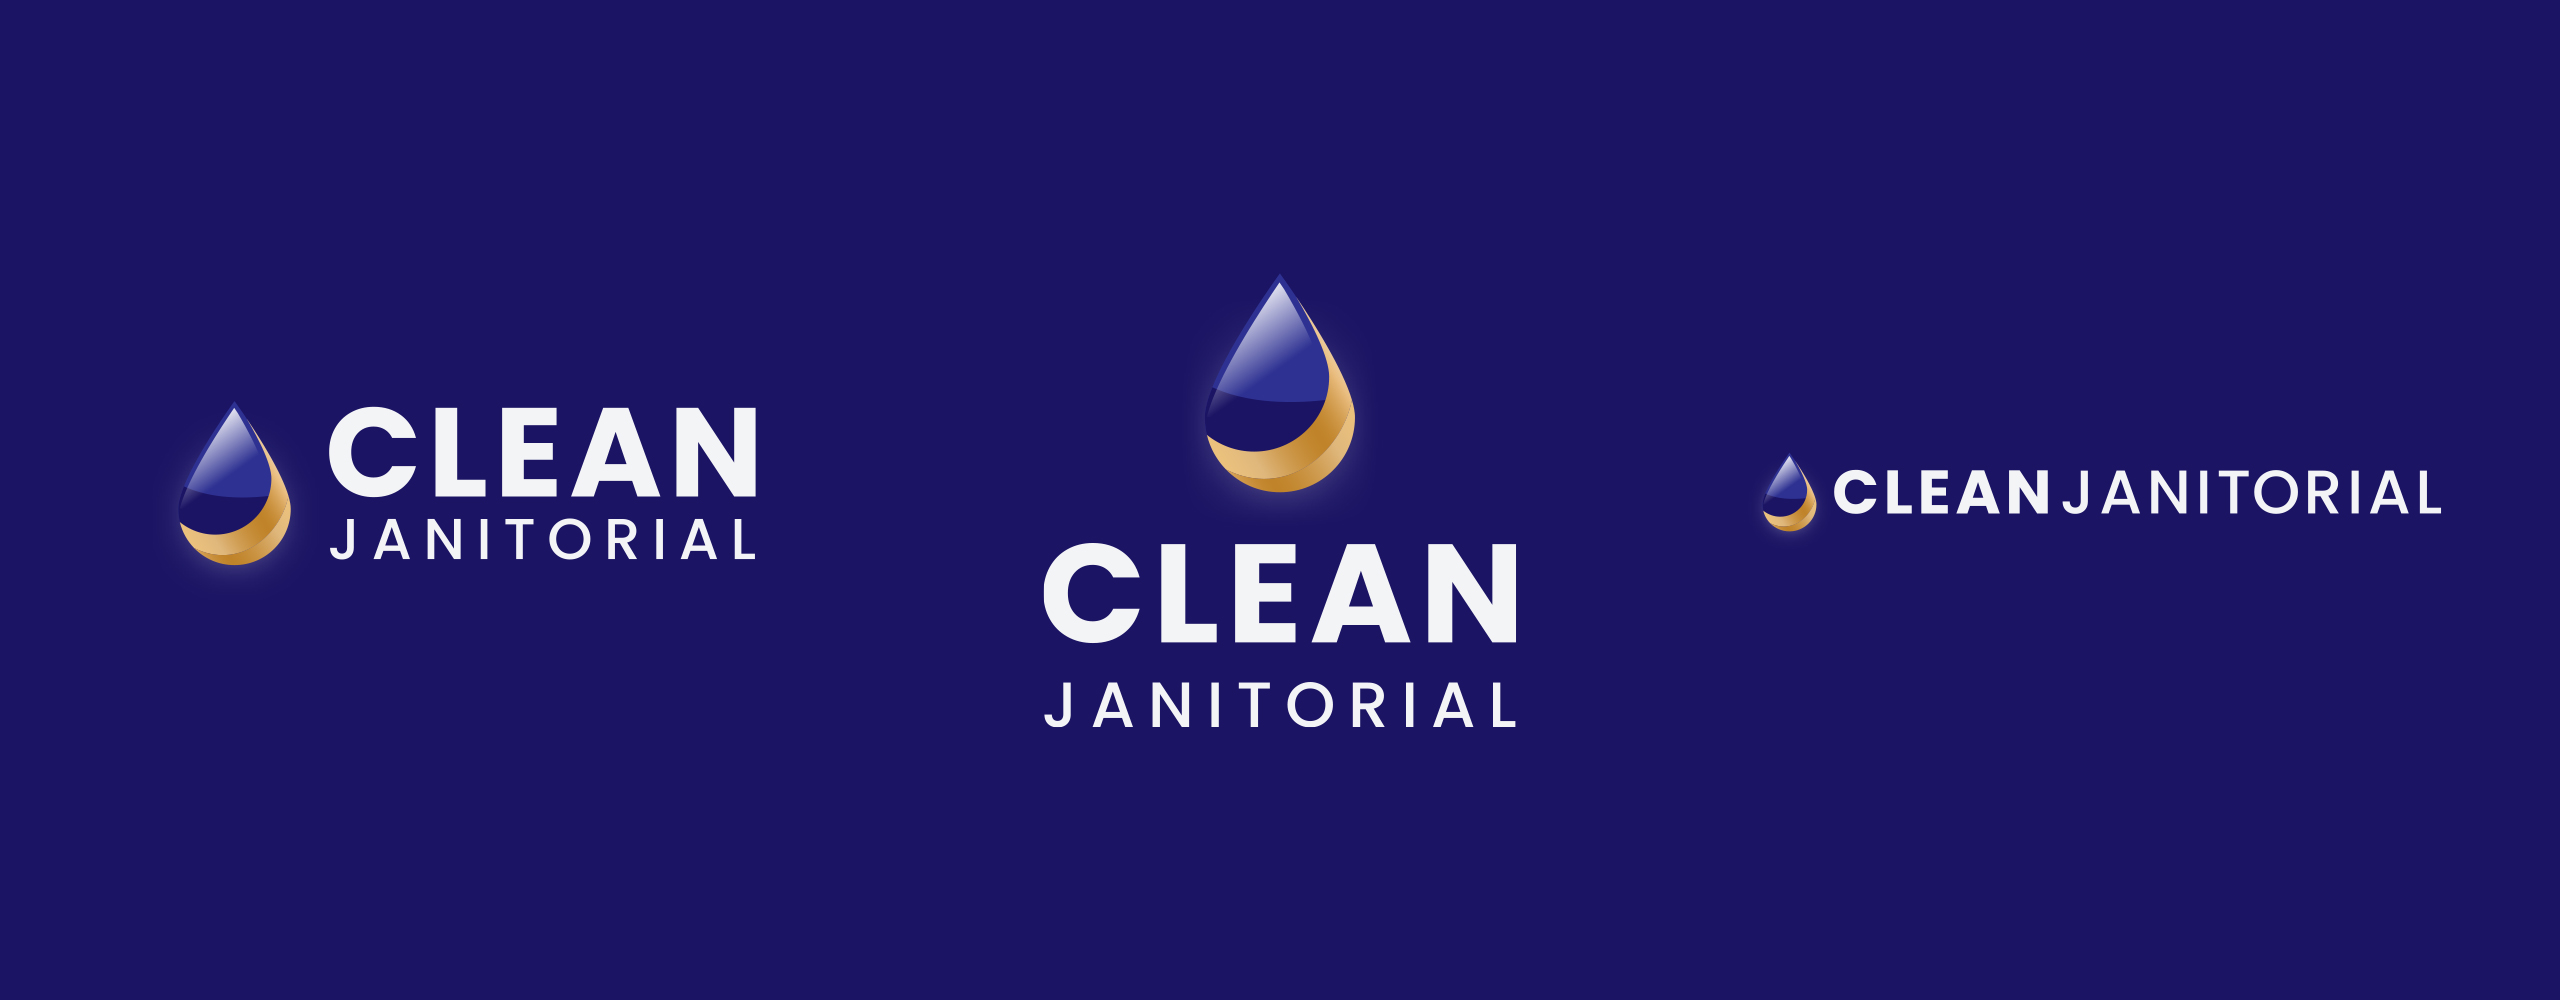 Clean Janitorial